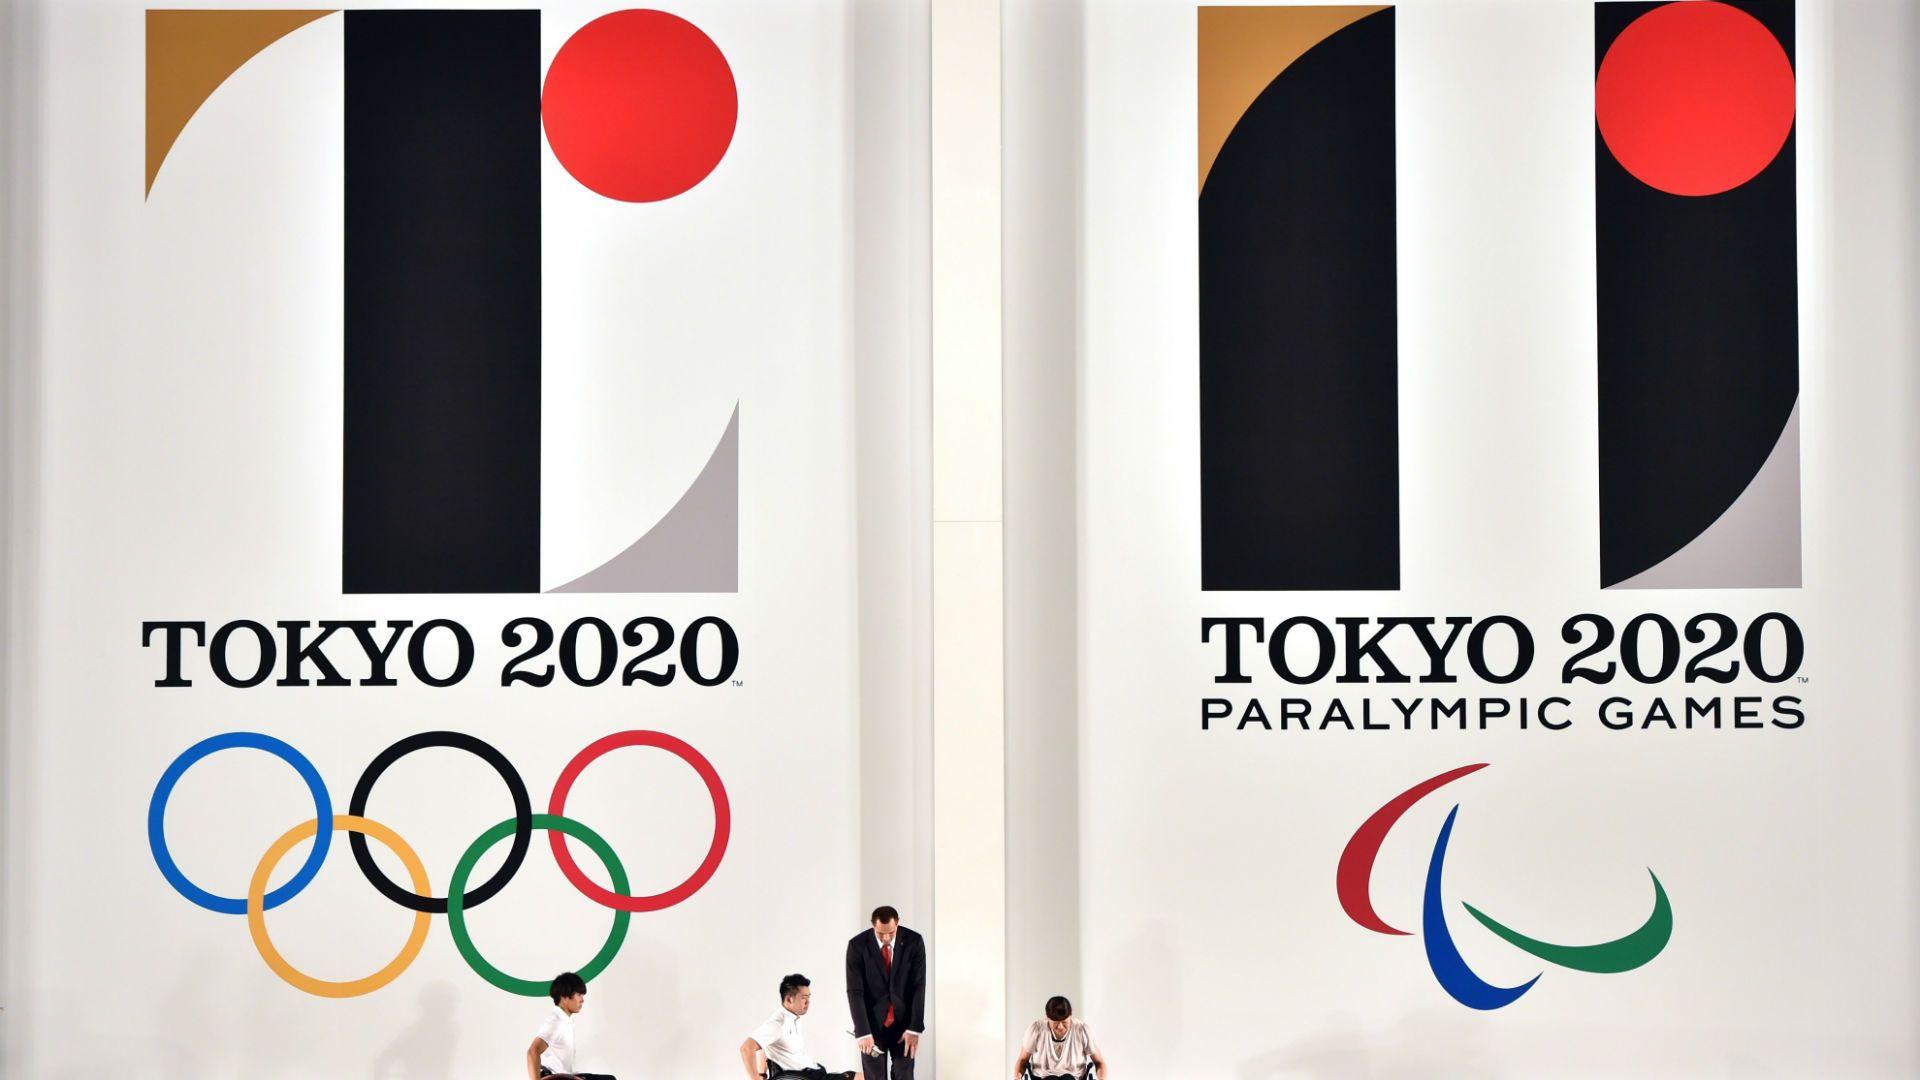 Tokyo 2020 Summer Olympics logo is a controversial throwback